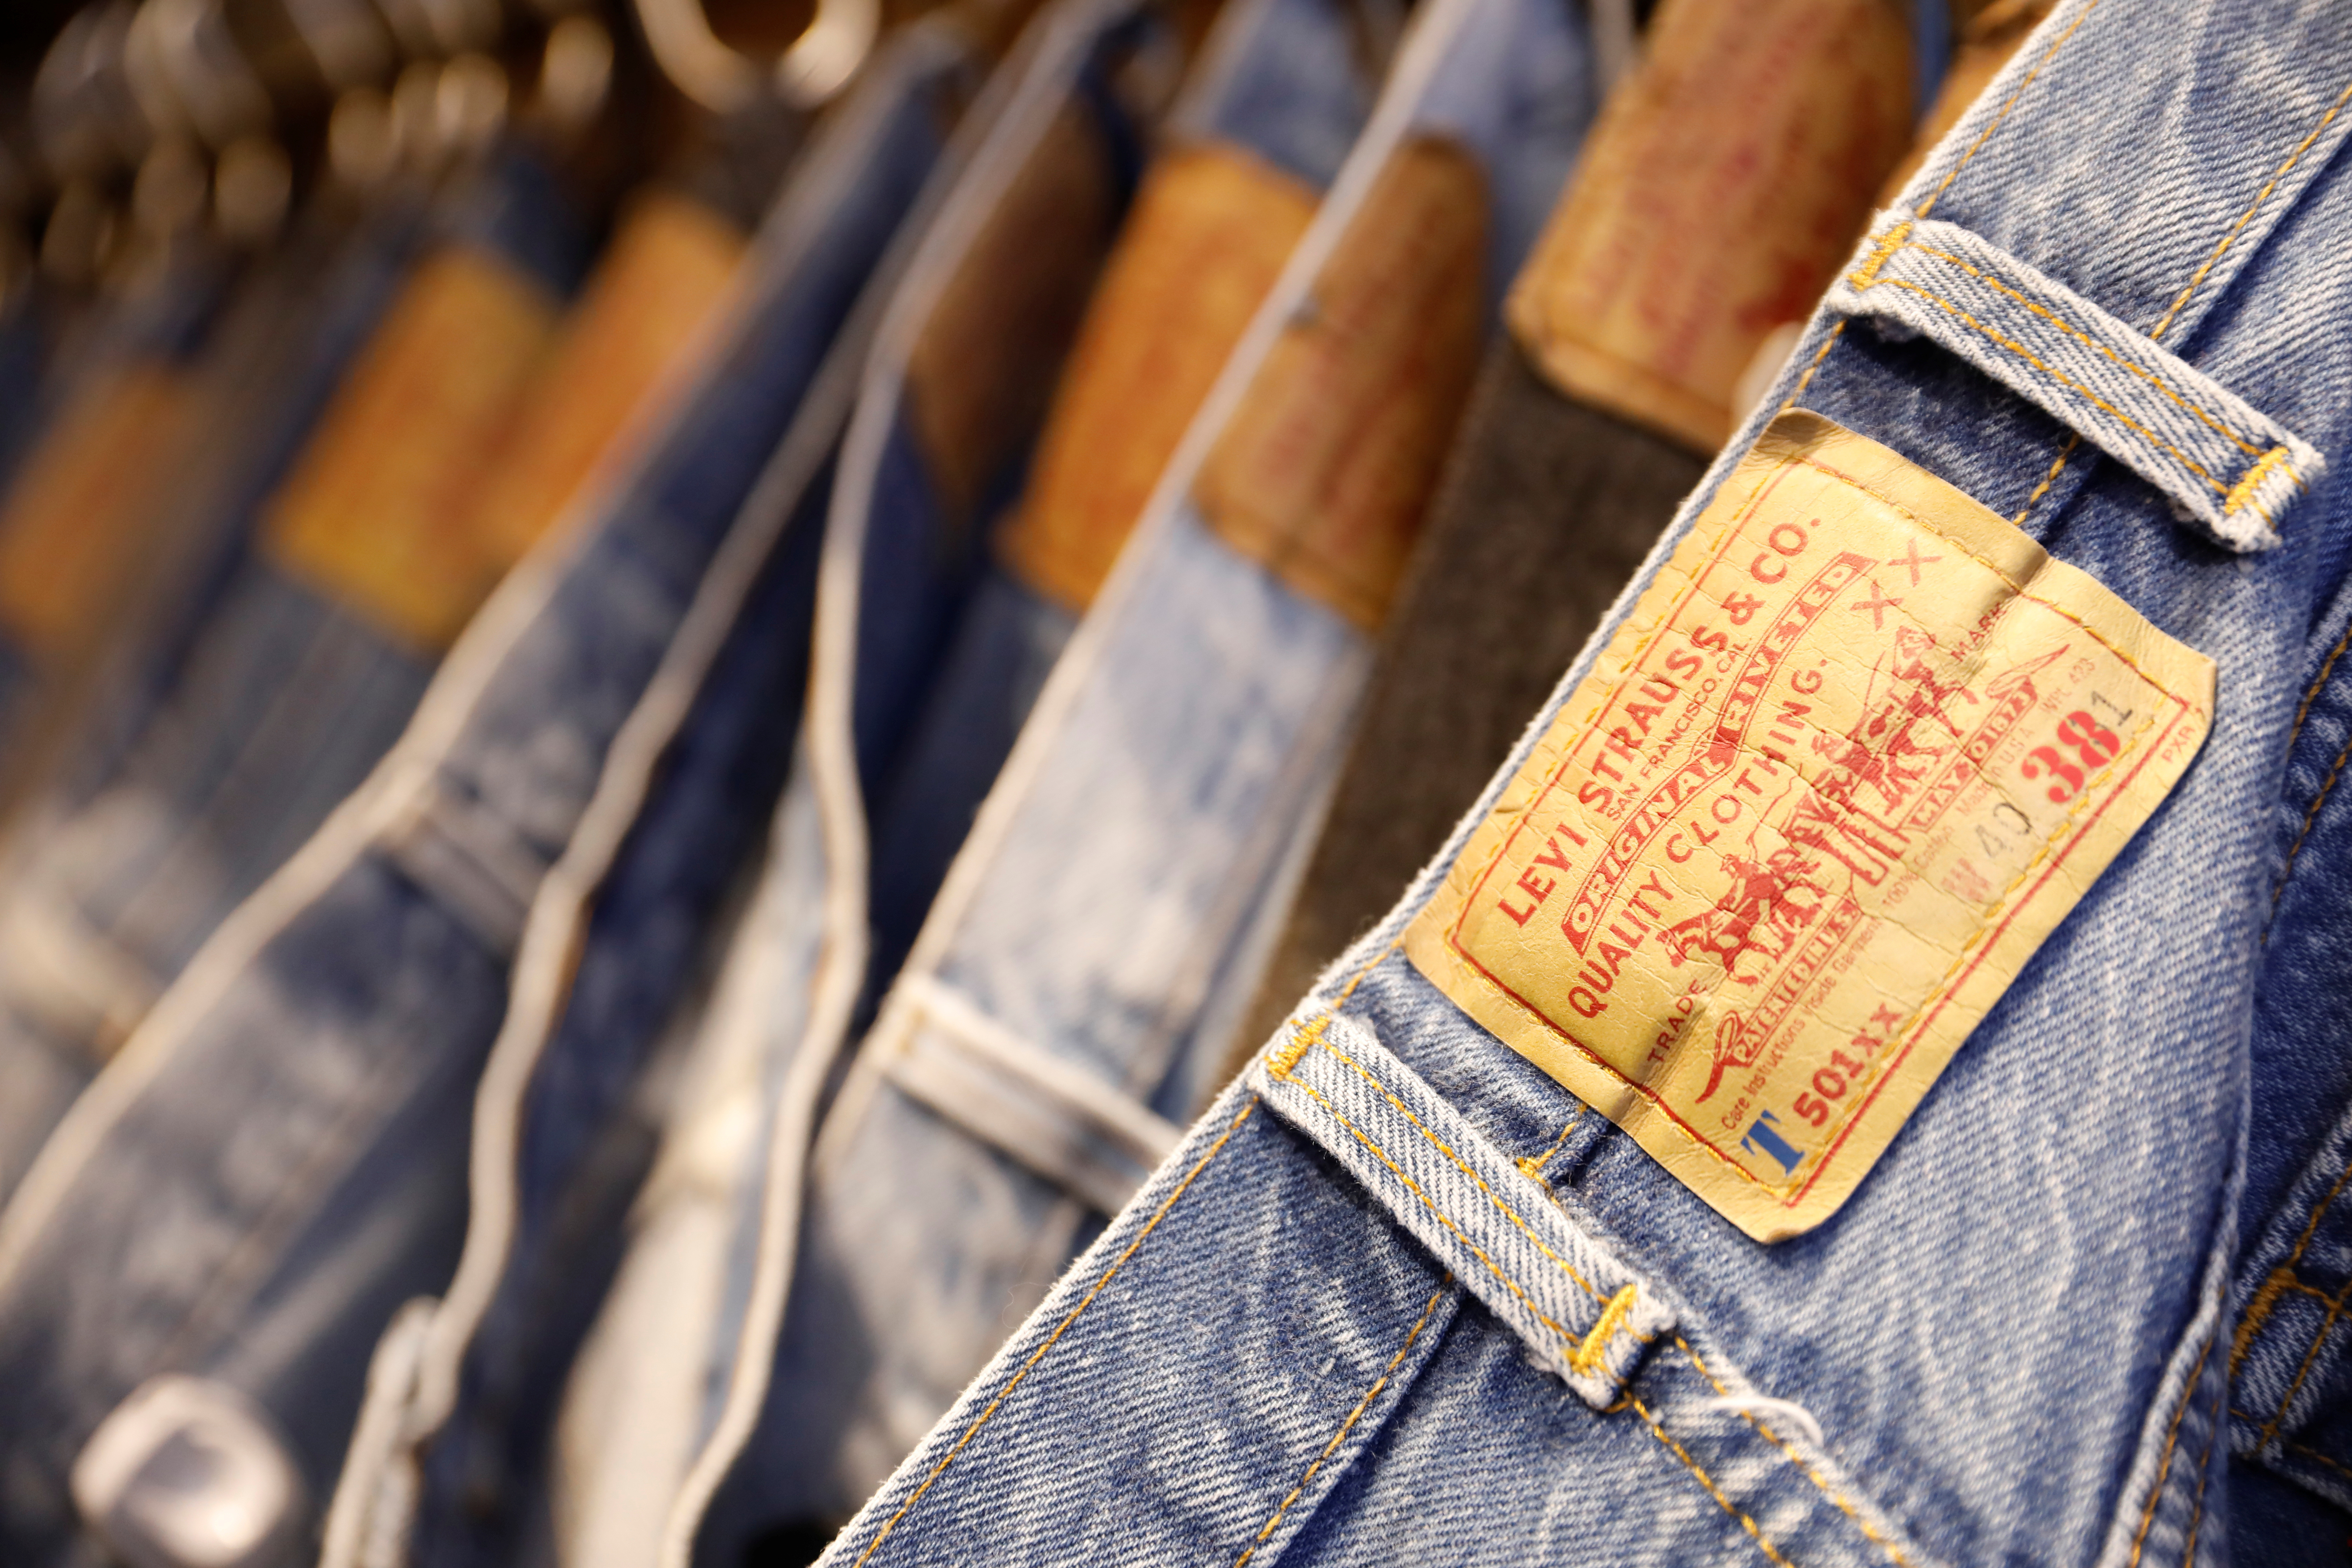 Jeans trousers are displayed at a Levi Strauss store in New York